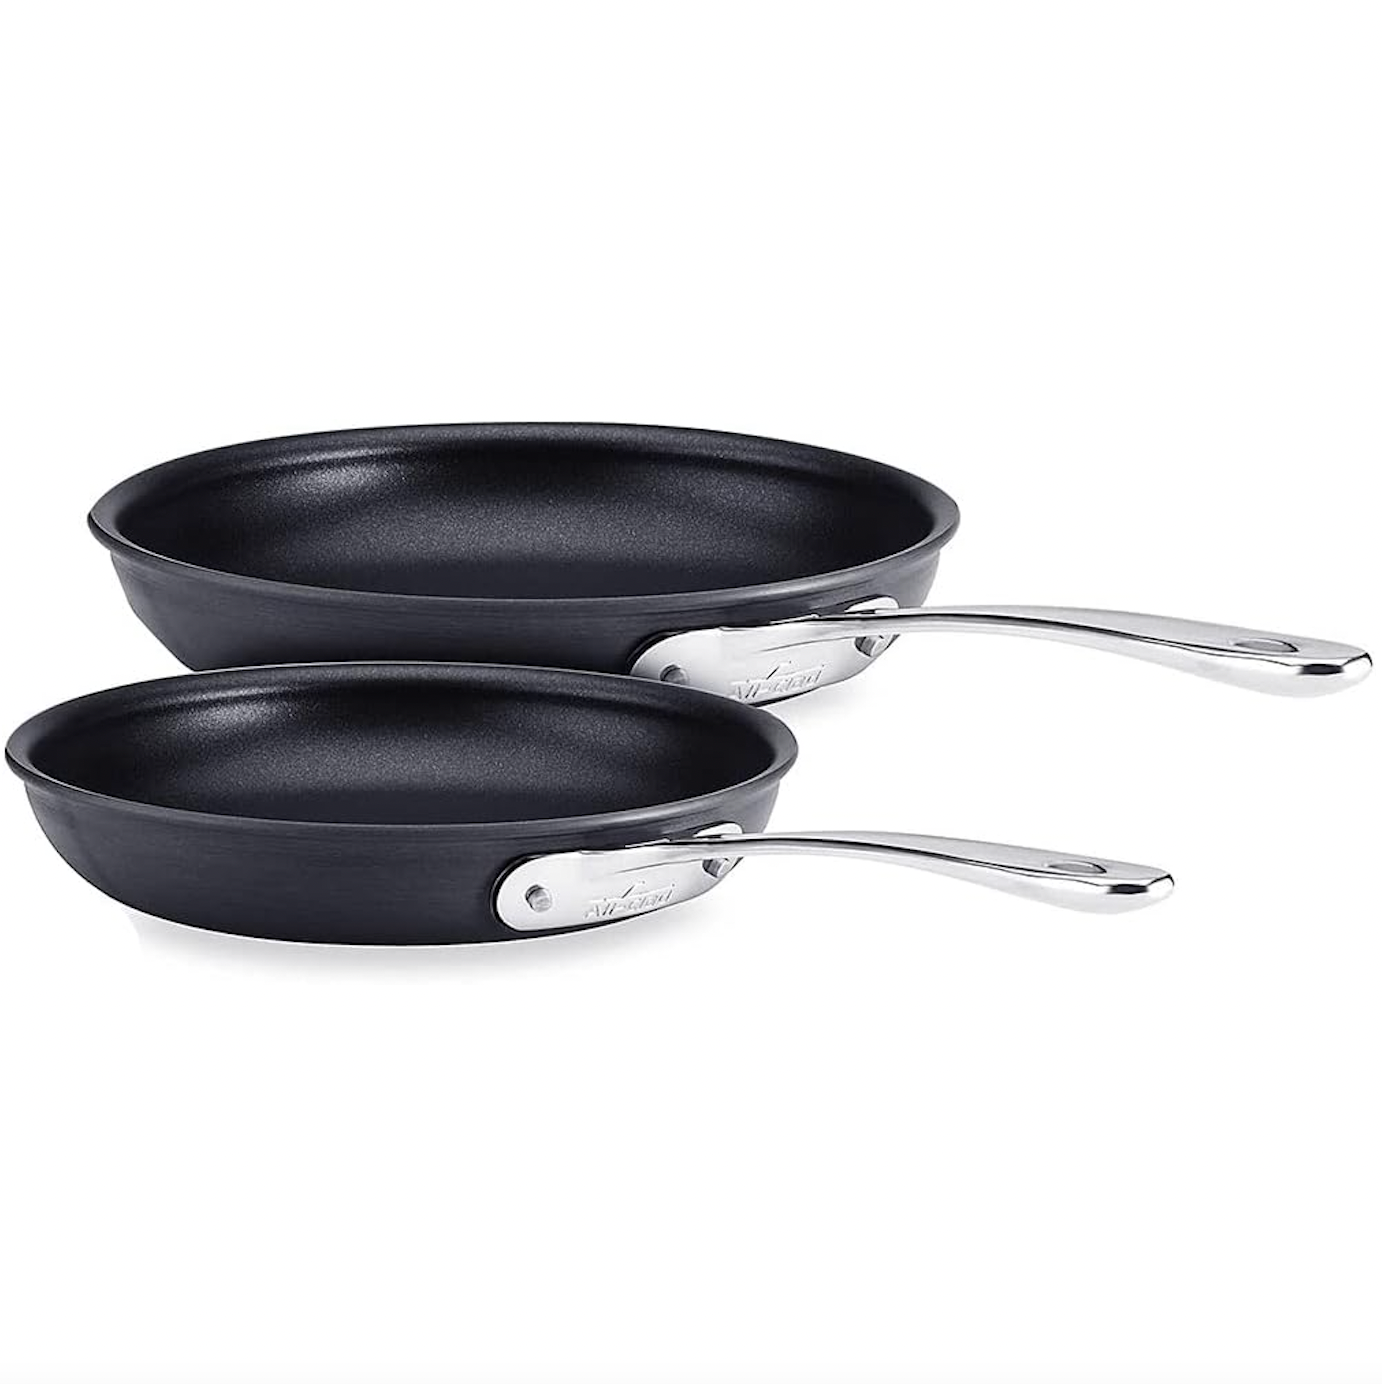 All-Clad Hard Anodized Frying Pan 2-Piece Set